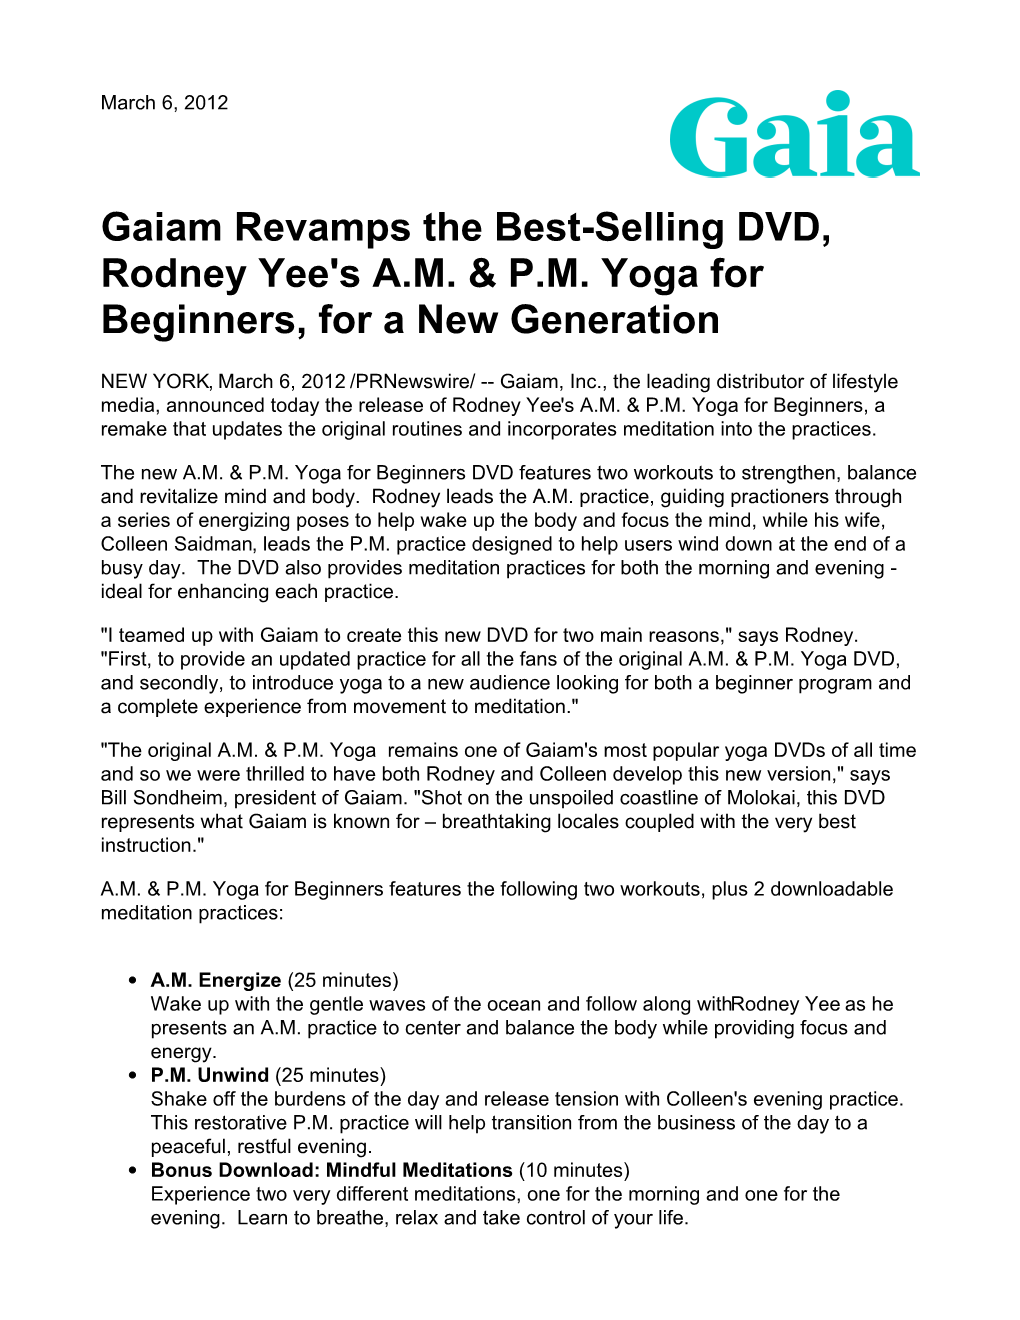 Gaiam Revamps the Best-Selling DVD, Rodney Yee's A.M. & P.M. Yoga